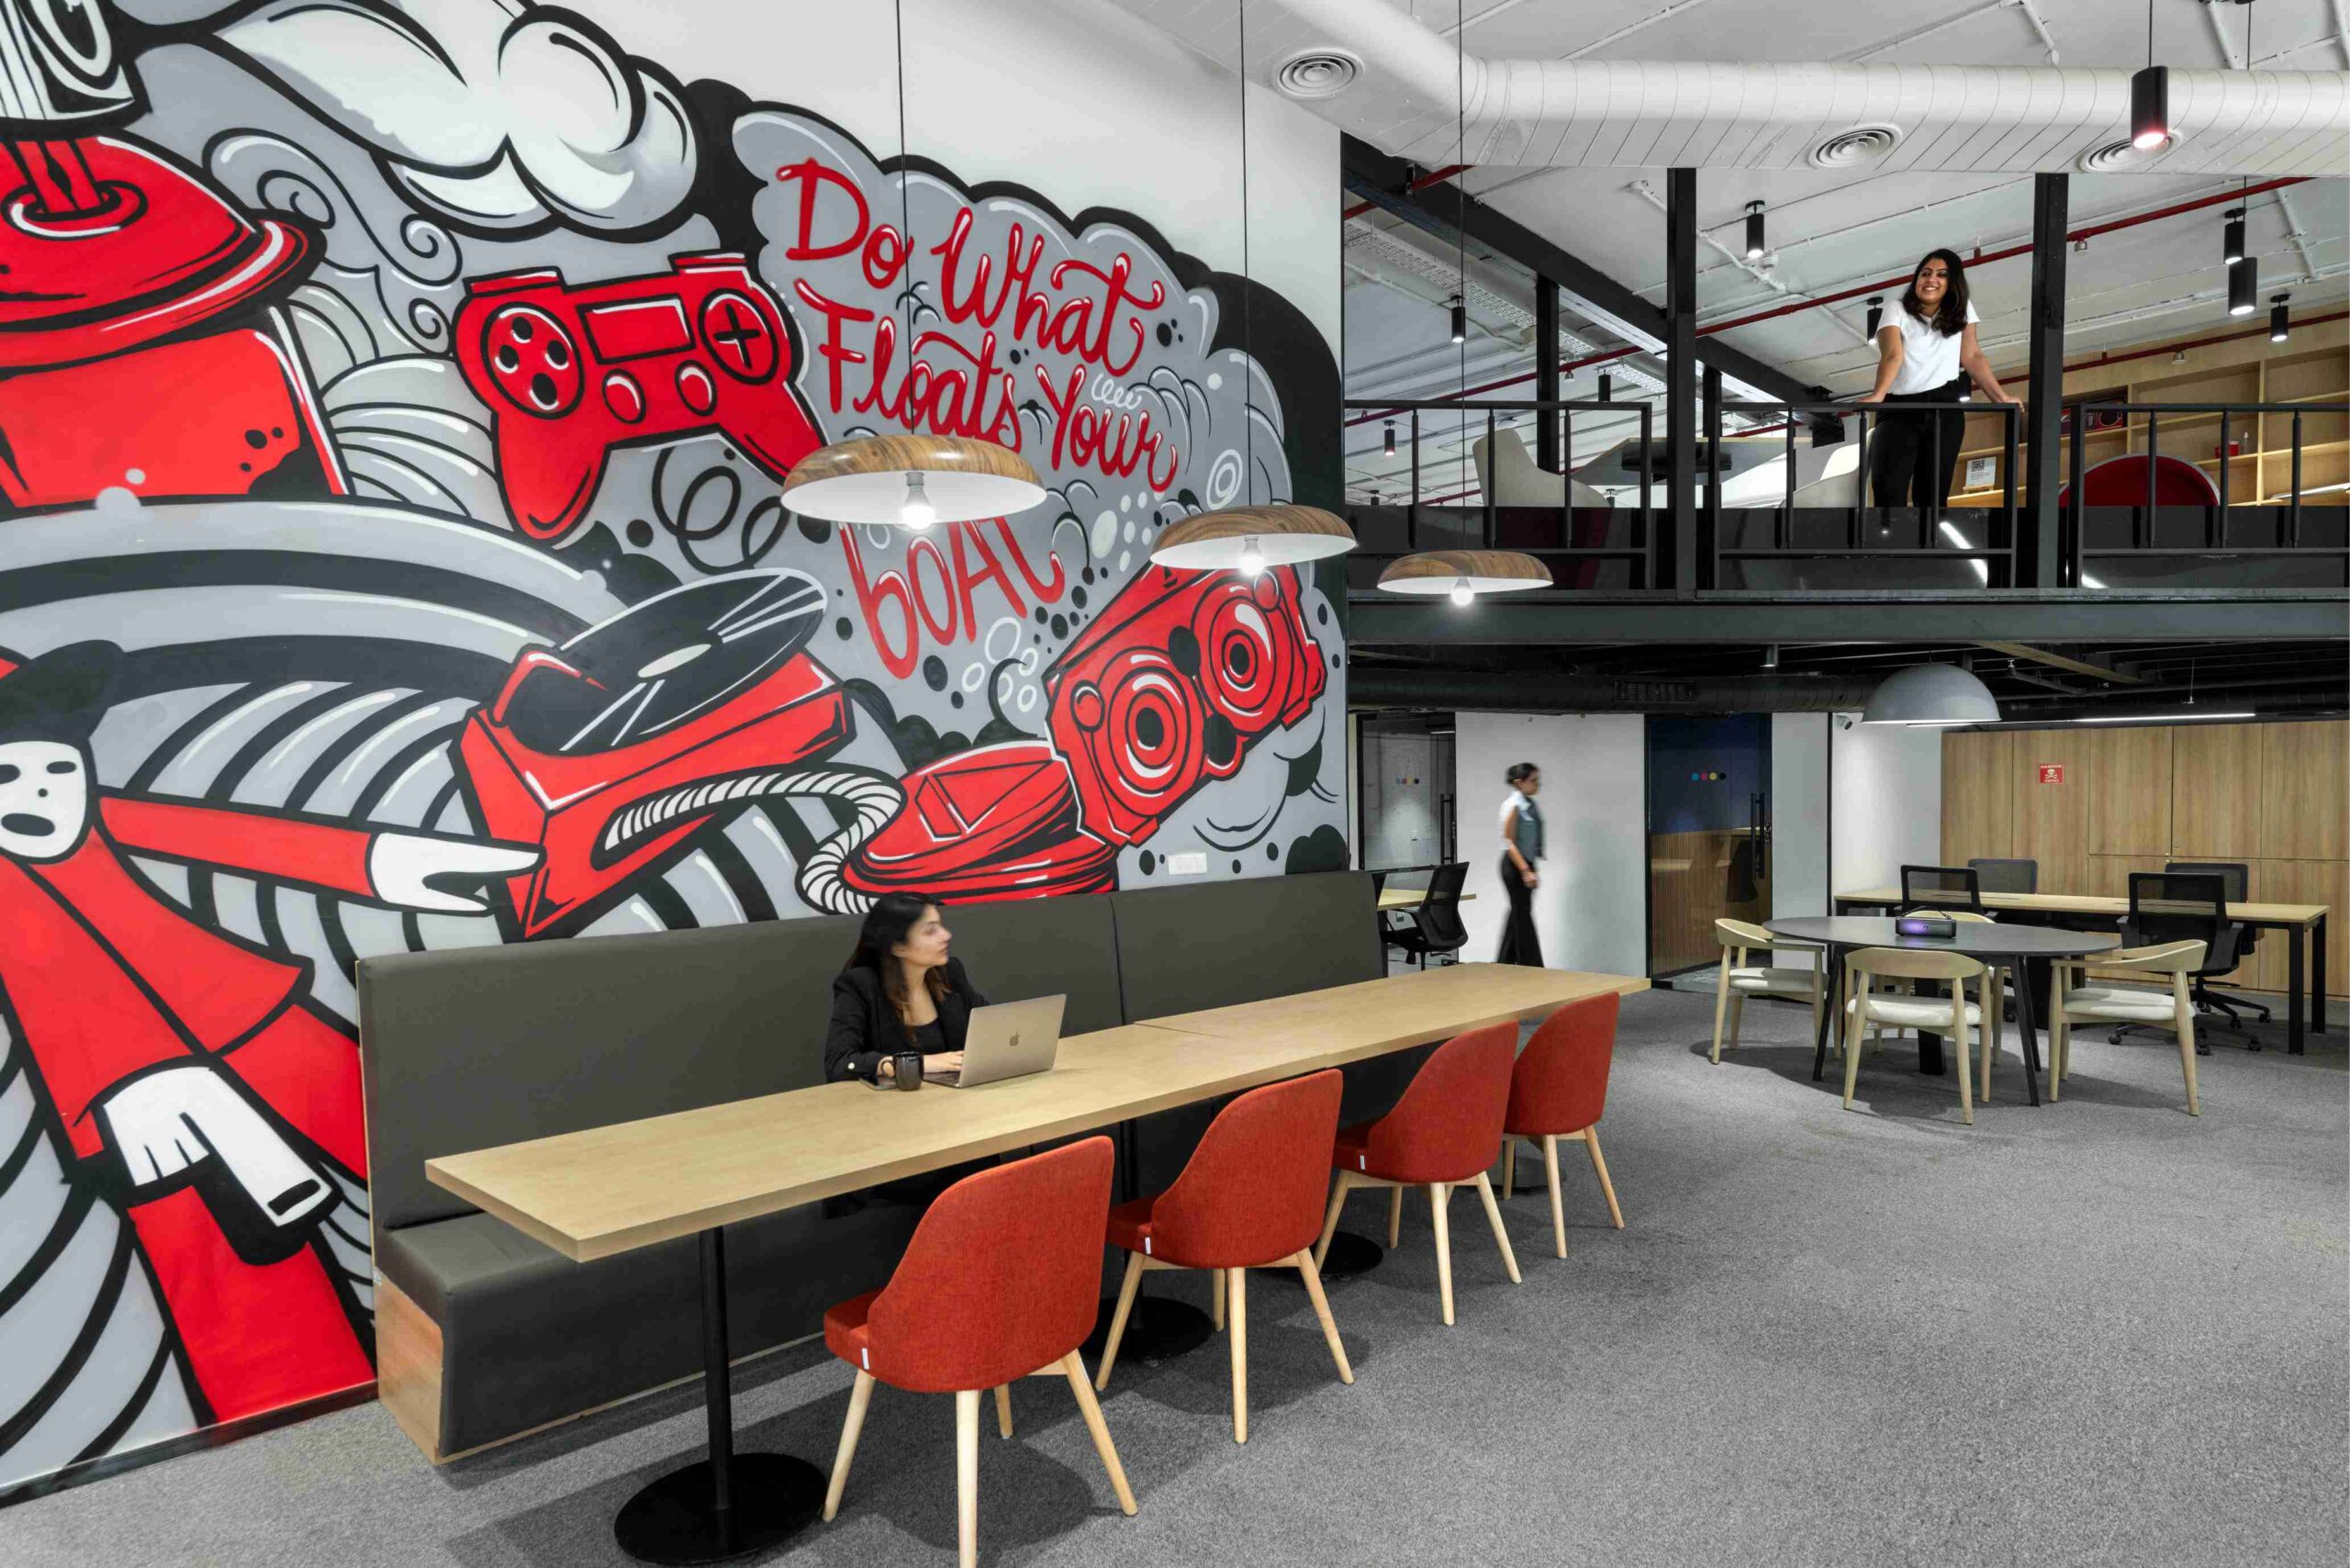 boAt partners with Space Matrix; opens new office space that redefines work culture and inspires self-discovery.